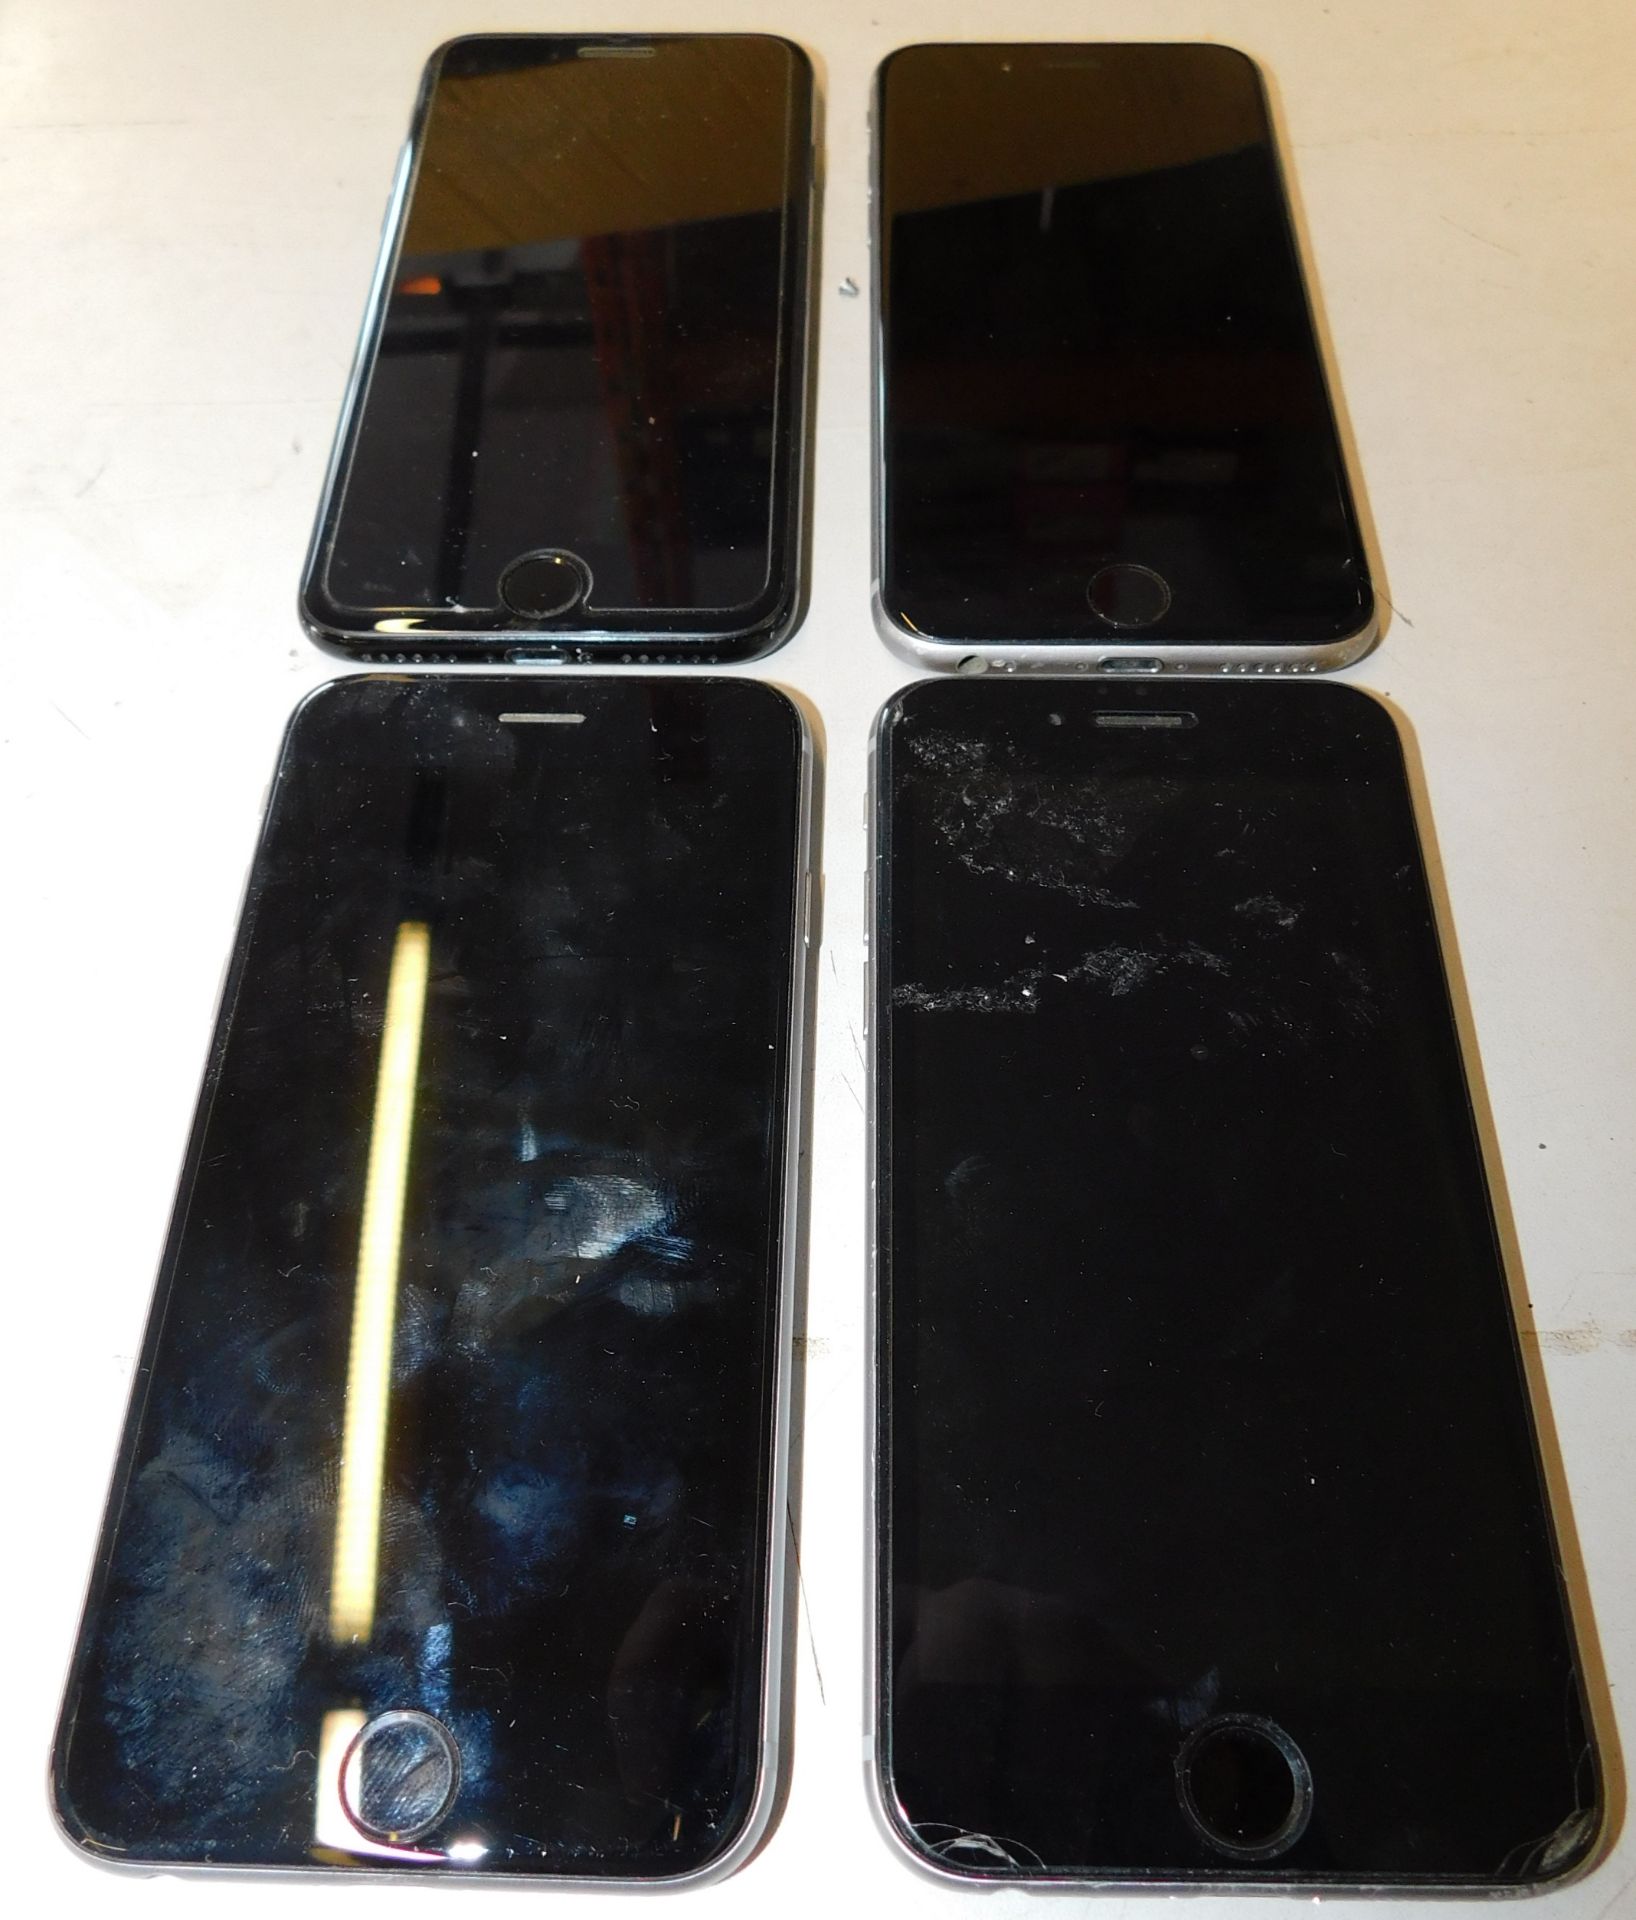 Apple iPhone 7 (128GB) 2 Apple iPhone 6 & iPhone 6s (Location: Stockport. Please Refer to General